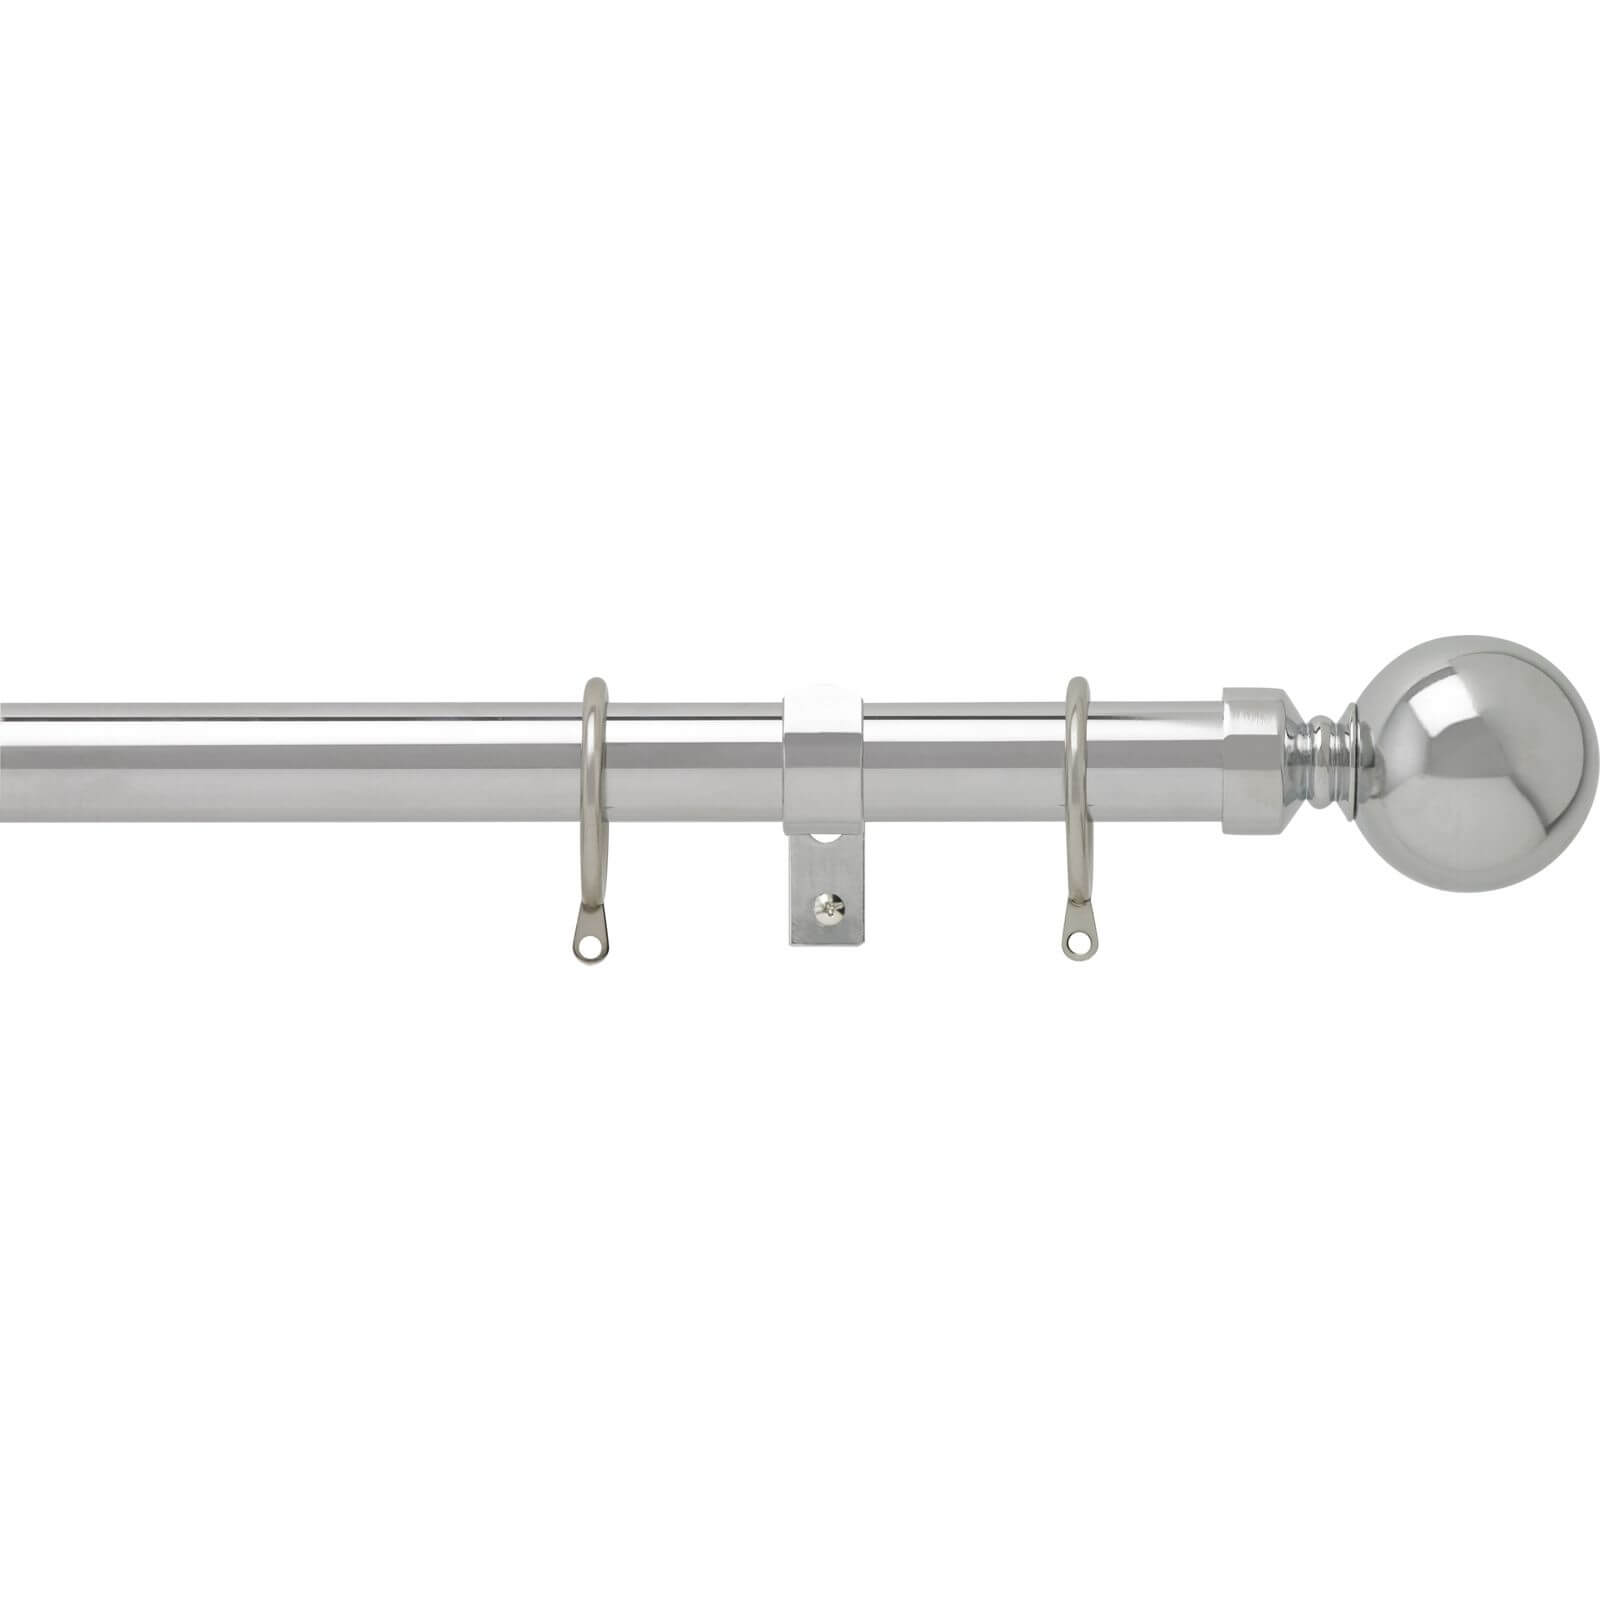 Chrome 28mm Fixed Curtain Pole With Ball 3.6m